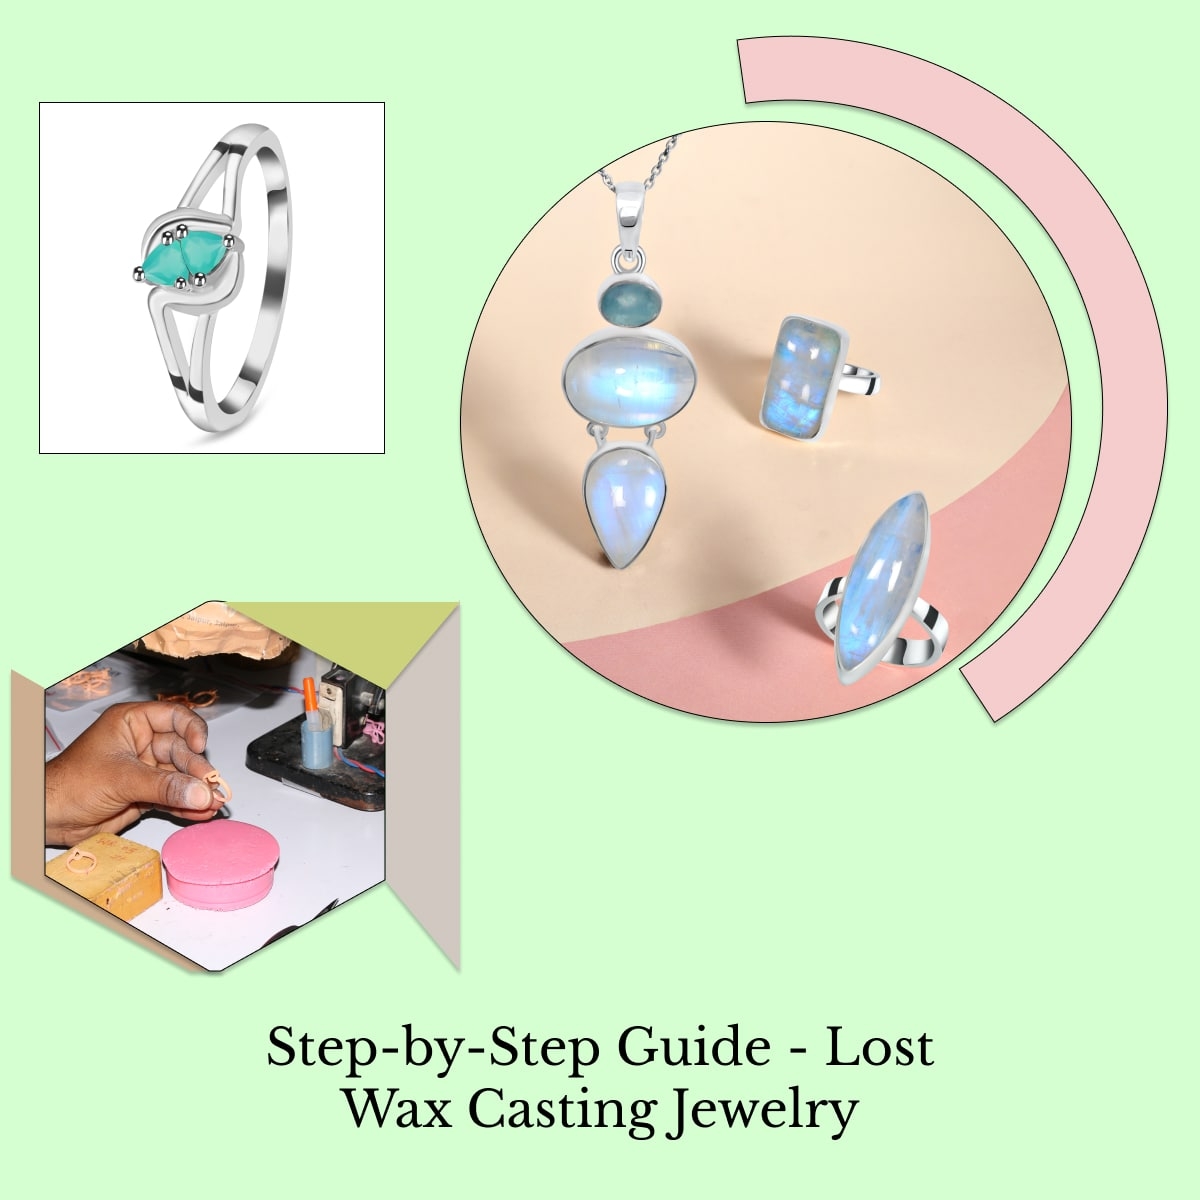 The Lost-Wax Casting Process for Creating Casting Jewelry